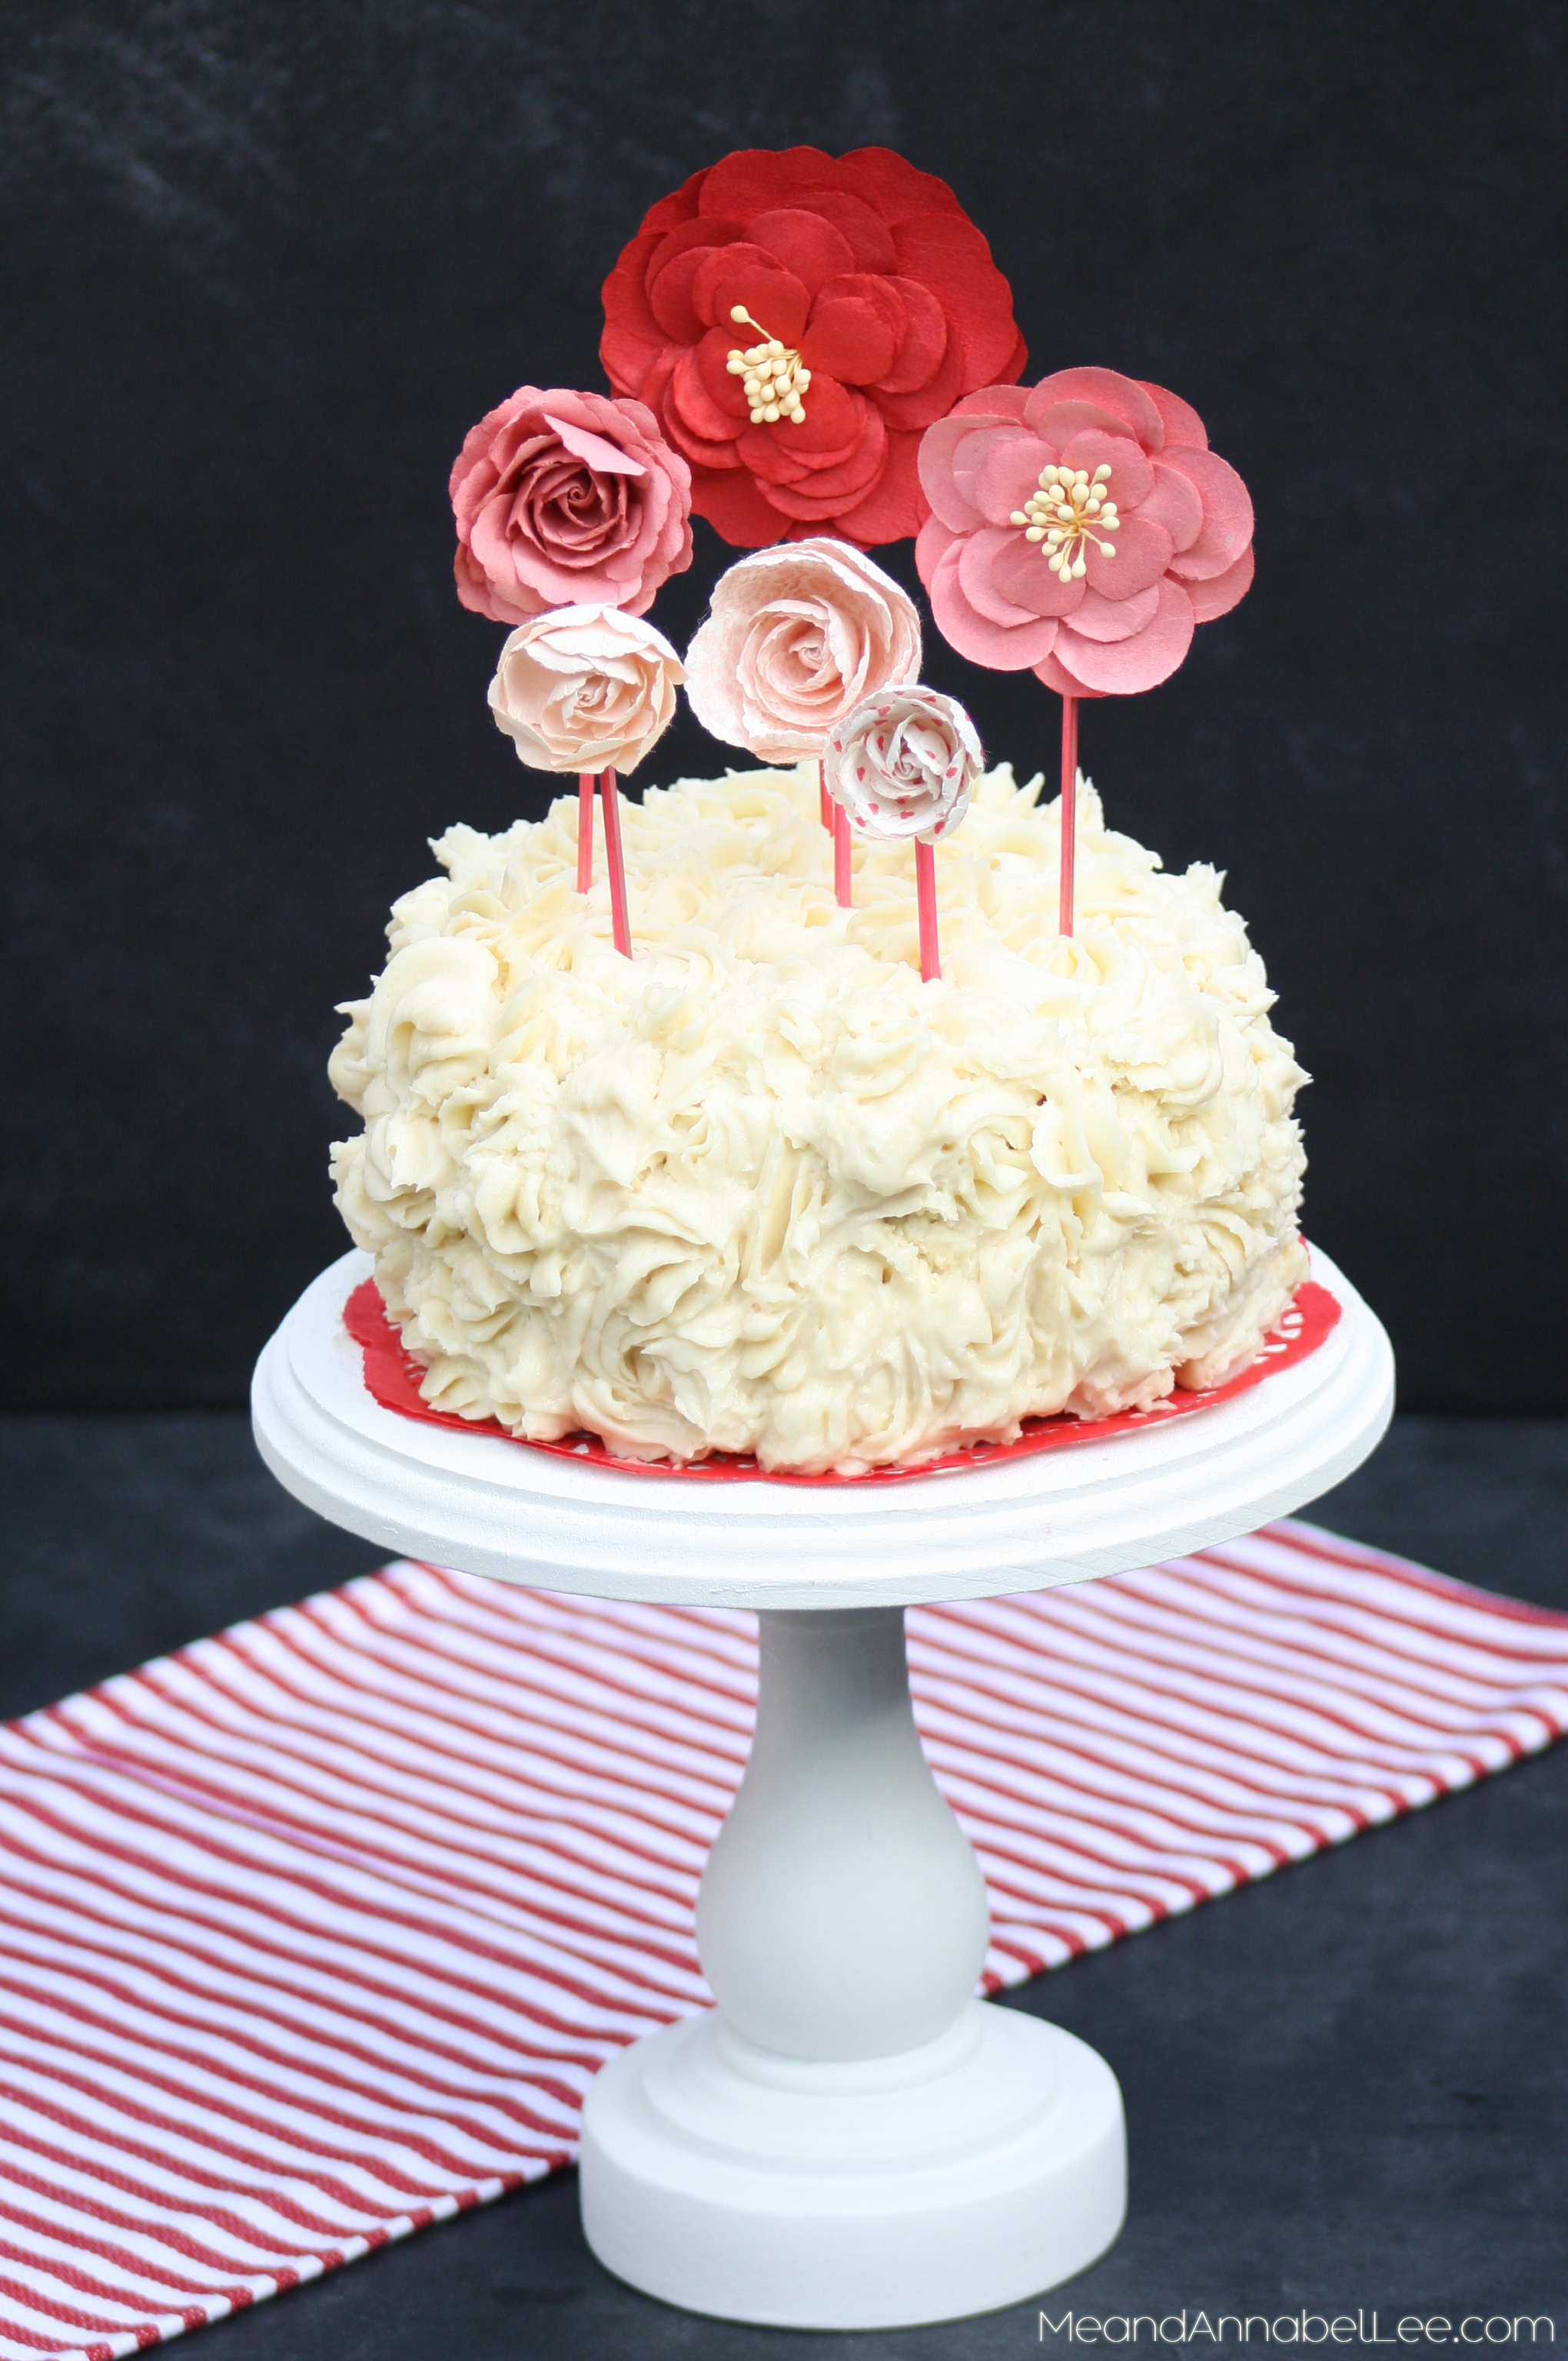 Victorian Inspired Paper Flower Cake Topper - Valentine's Day, Mother's Day, Bridal Shower, Baby Shower - www.MeandAnnabelLee.com